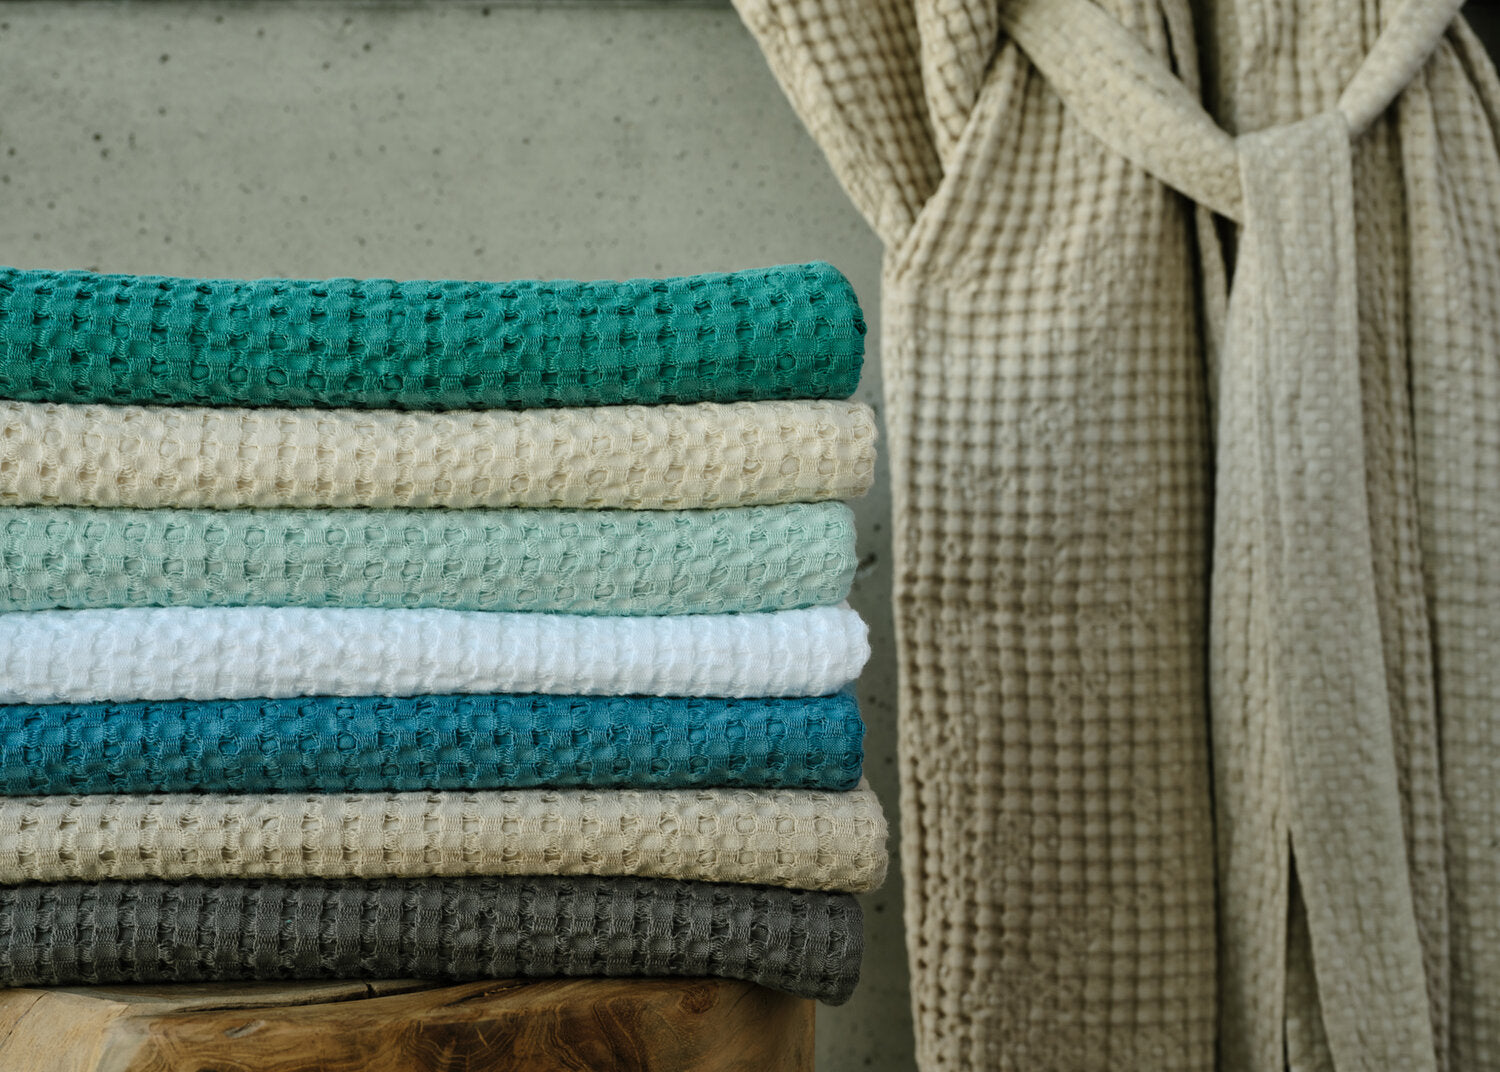 The Waffle Pousada Towel Collection is crafted with the BEST Egyptian cotton, offering lightweight yet absorbent quality in a distinctive waffle design. With 10 vibrant hues to choose from, these towels are ideal for spas and other bathing spaces in the home.